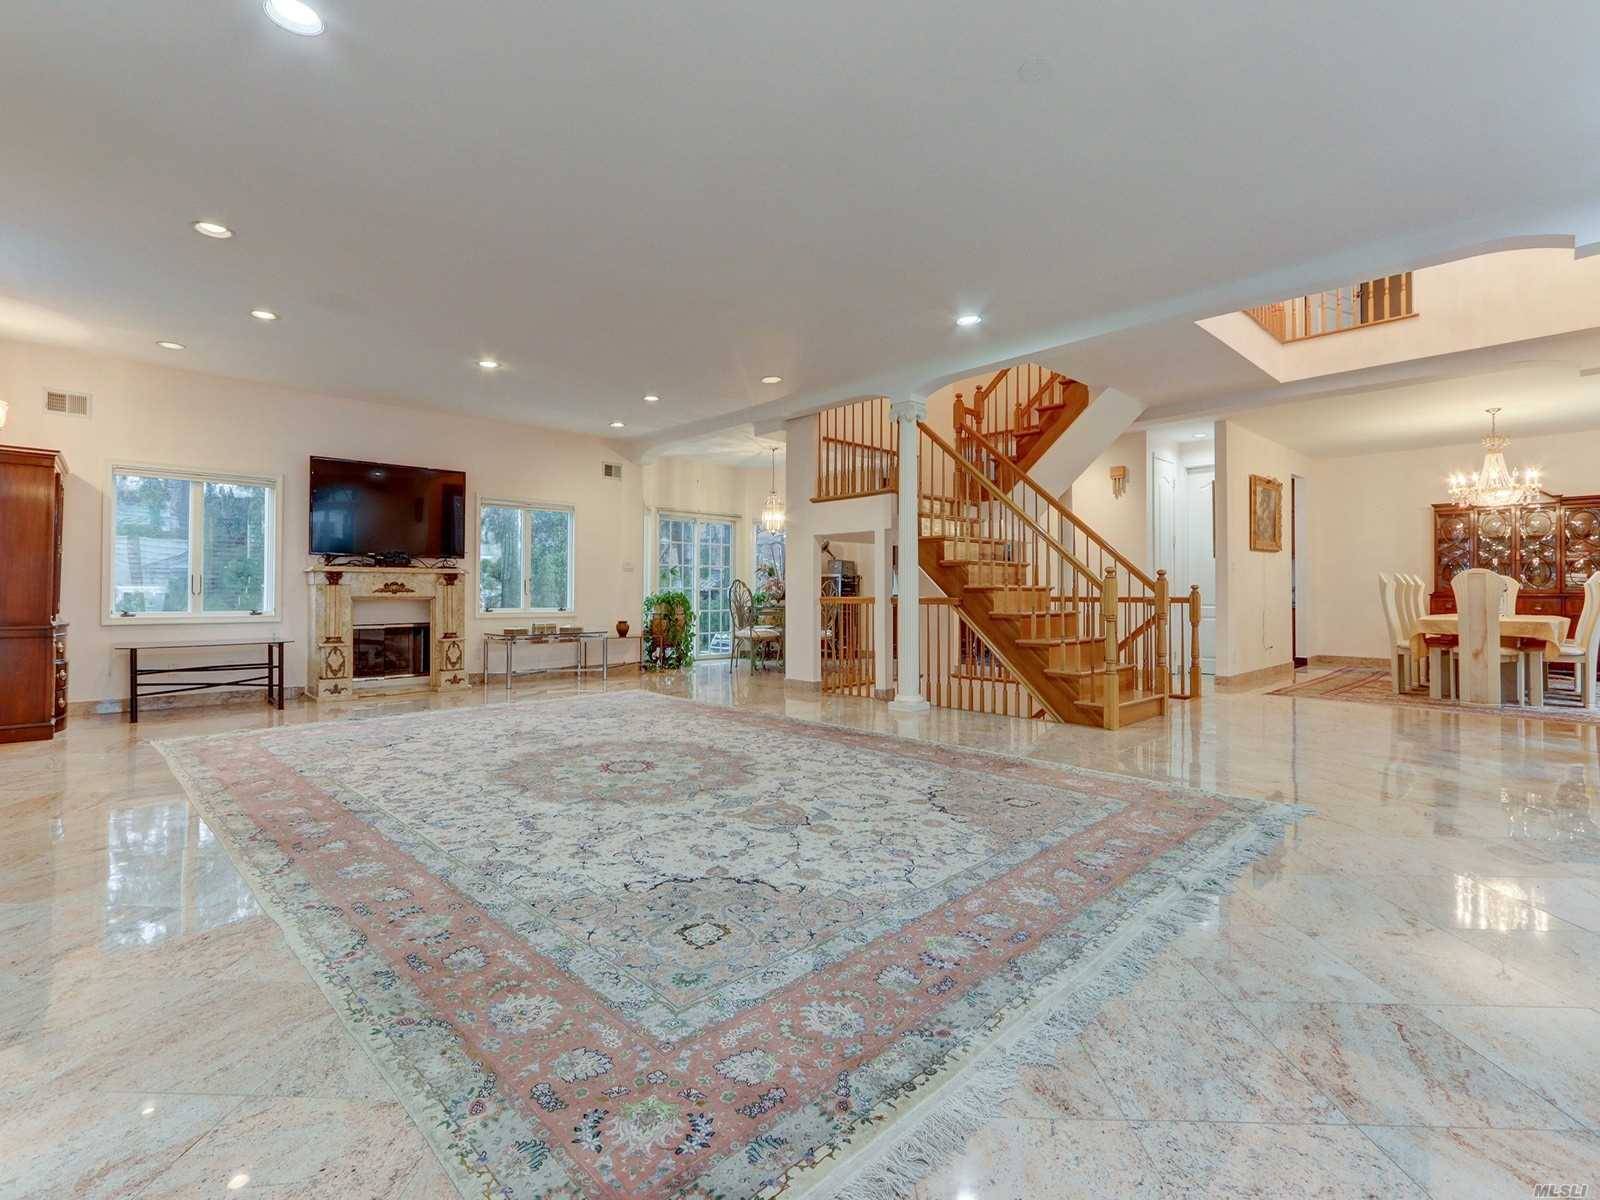 Designer Showcase Young Center Hall Colonial With An Impressive Grand Entrance, Chef's Gourmet Kitchen Breakfast Room, Easy Flowing Versatile Floor Plan Is Ideal For Intimate Dinner Parties Or Large Gatherings, ...